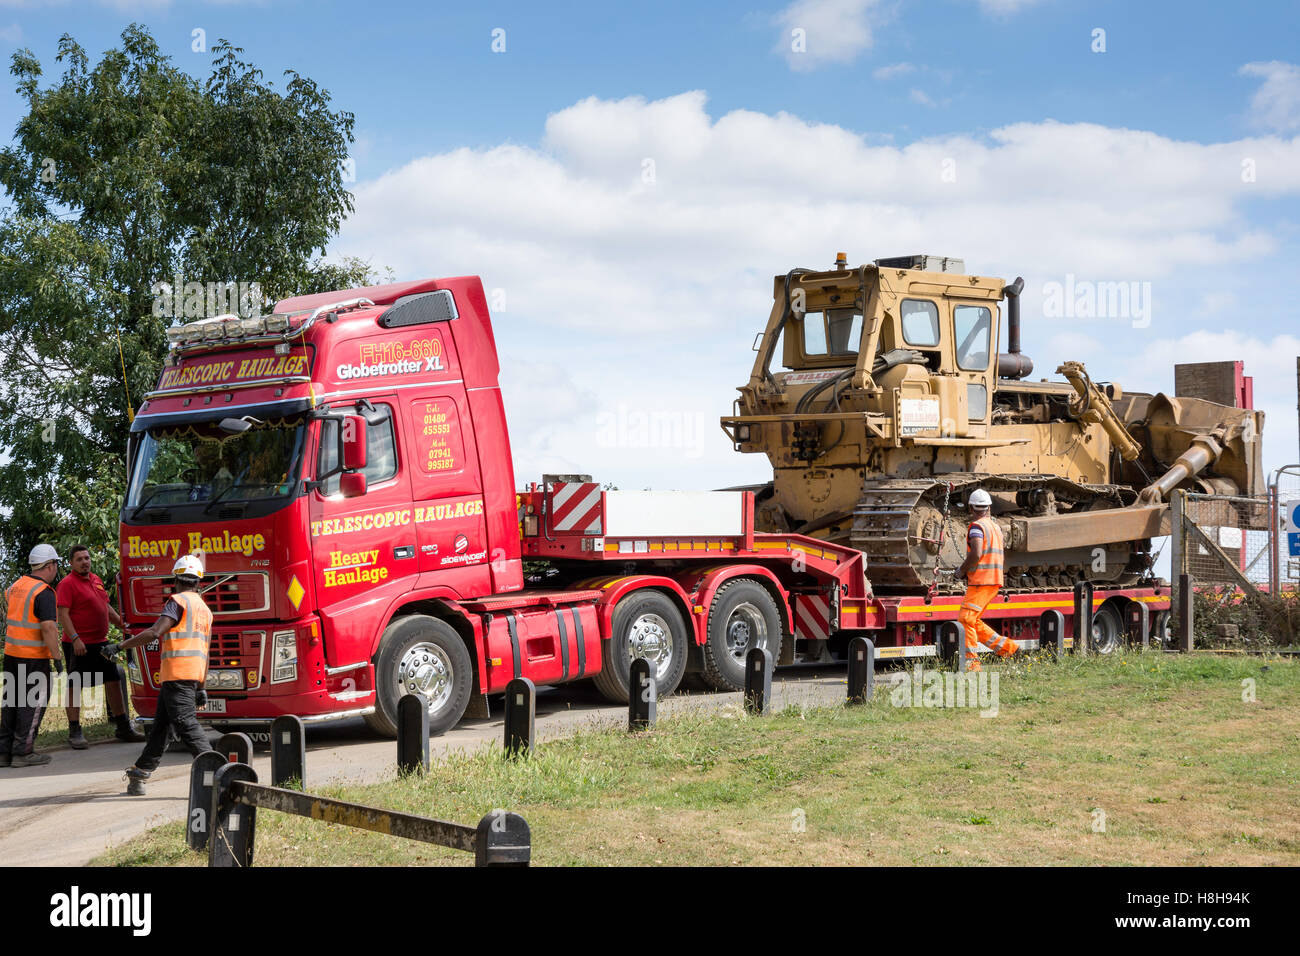 Grader being transported on haulage truck, Waterside Drive, Walton-on-Thames, Surrey, England, United Kingdom Stock Photo